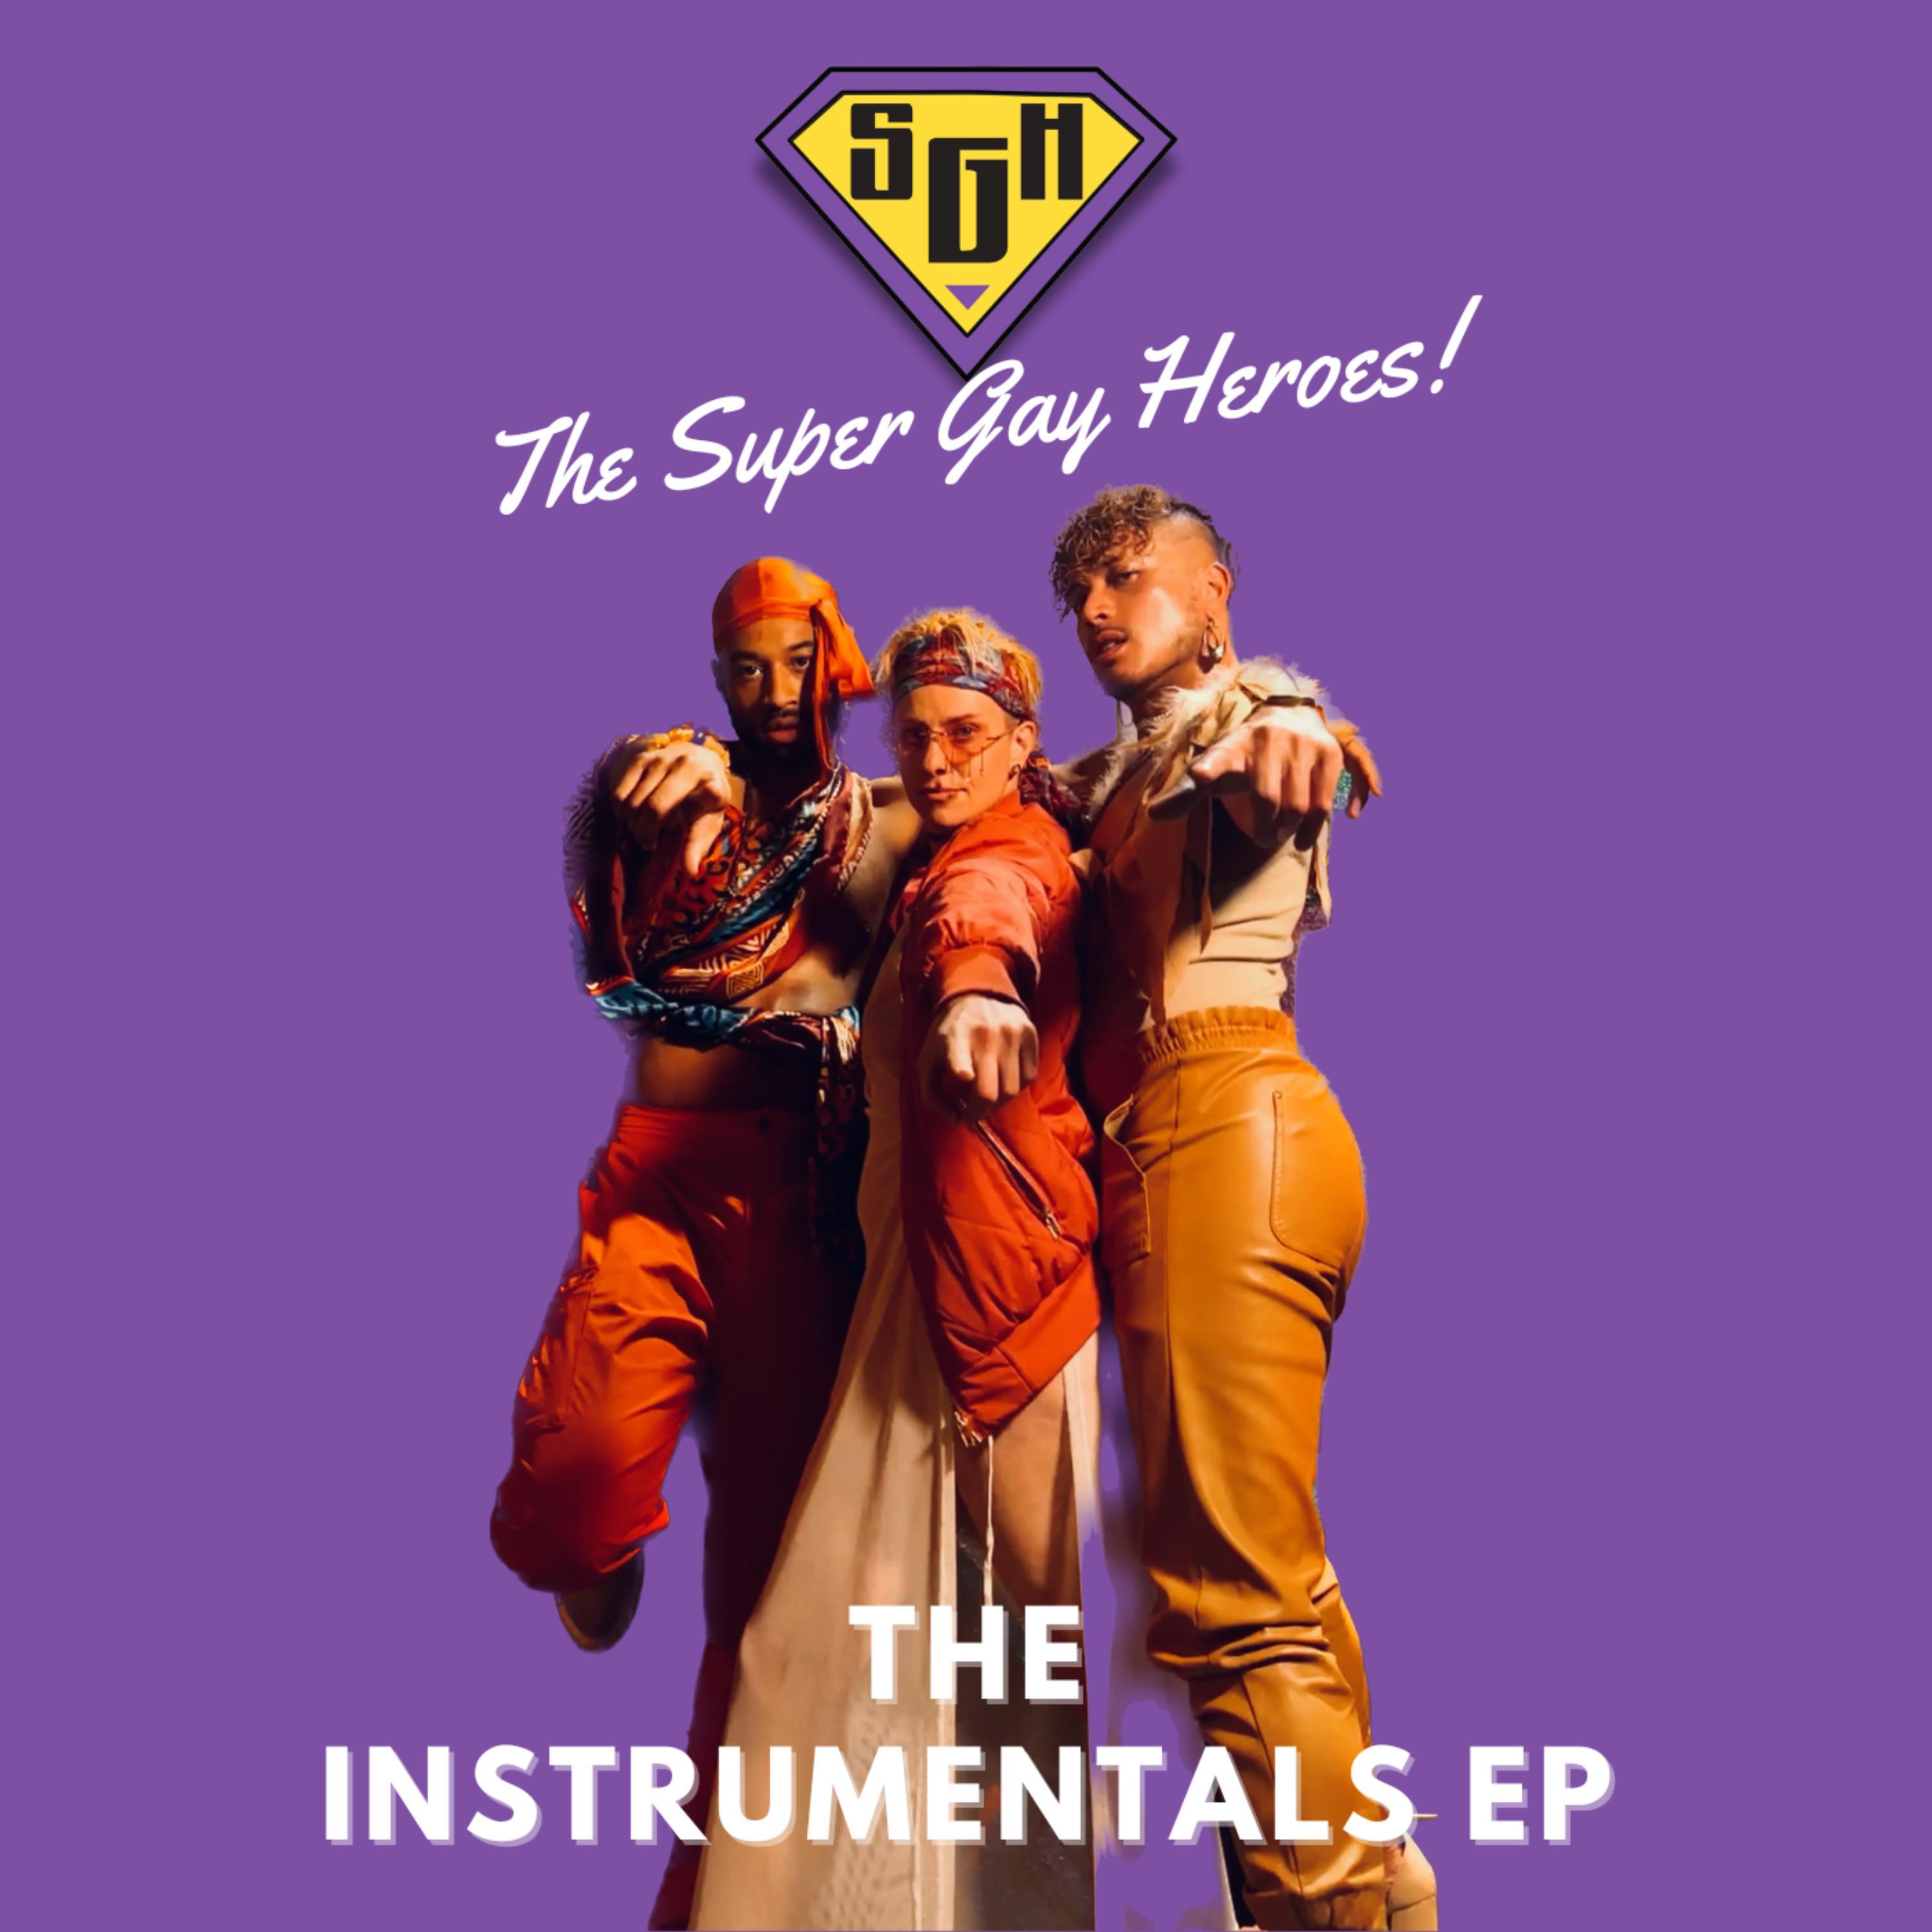 The Super Gay Heroes - SAVE THE WORLD